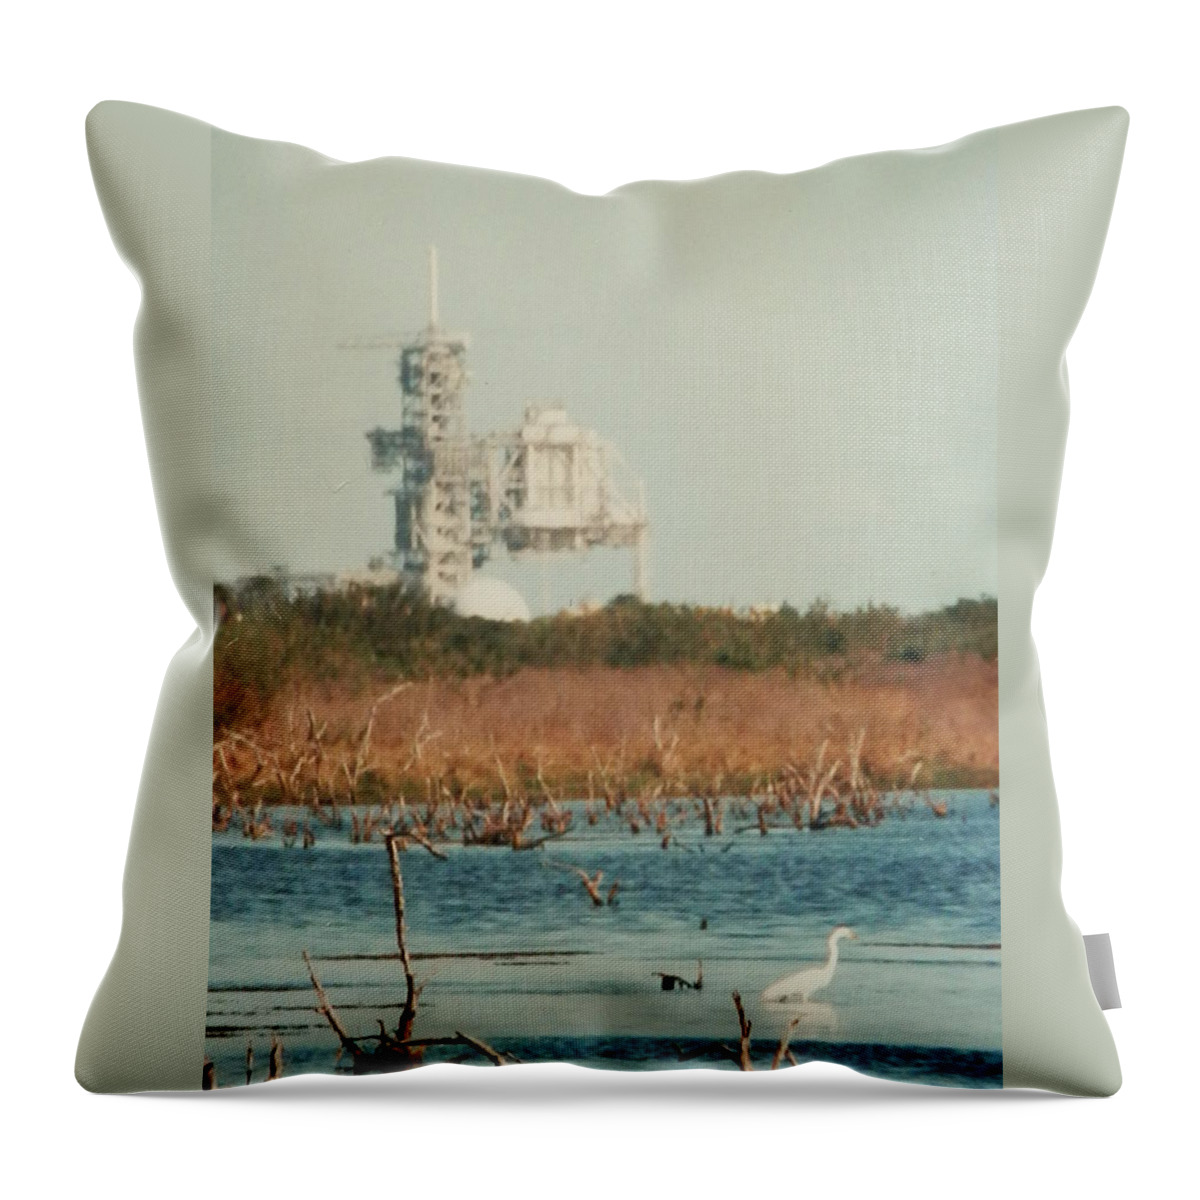 Scenic Throw Pillow featuring the photograph Cape Canaveral Launch Pad by Belinda Lee